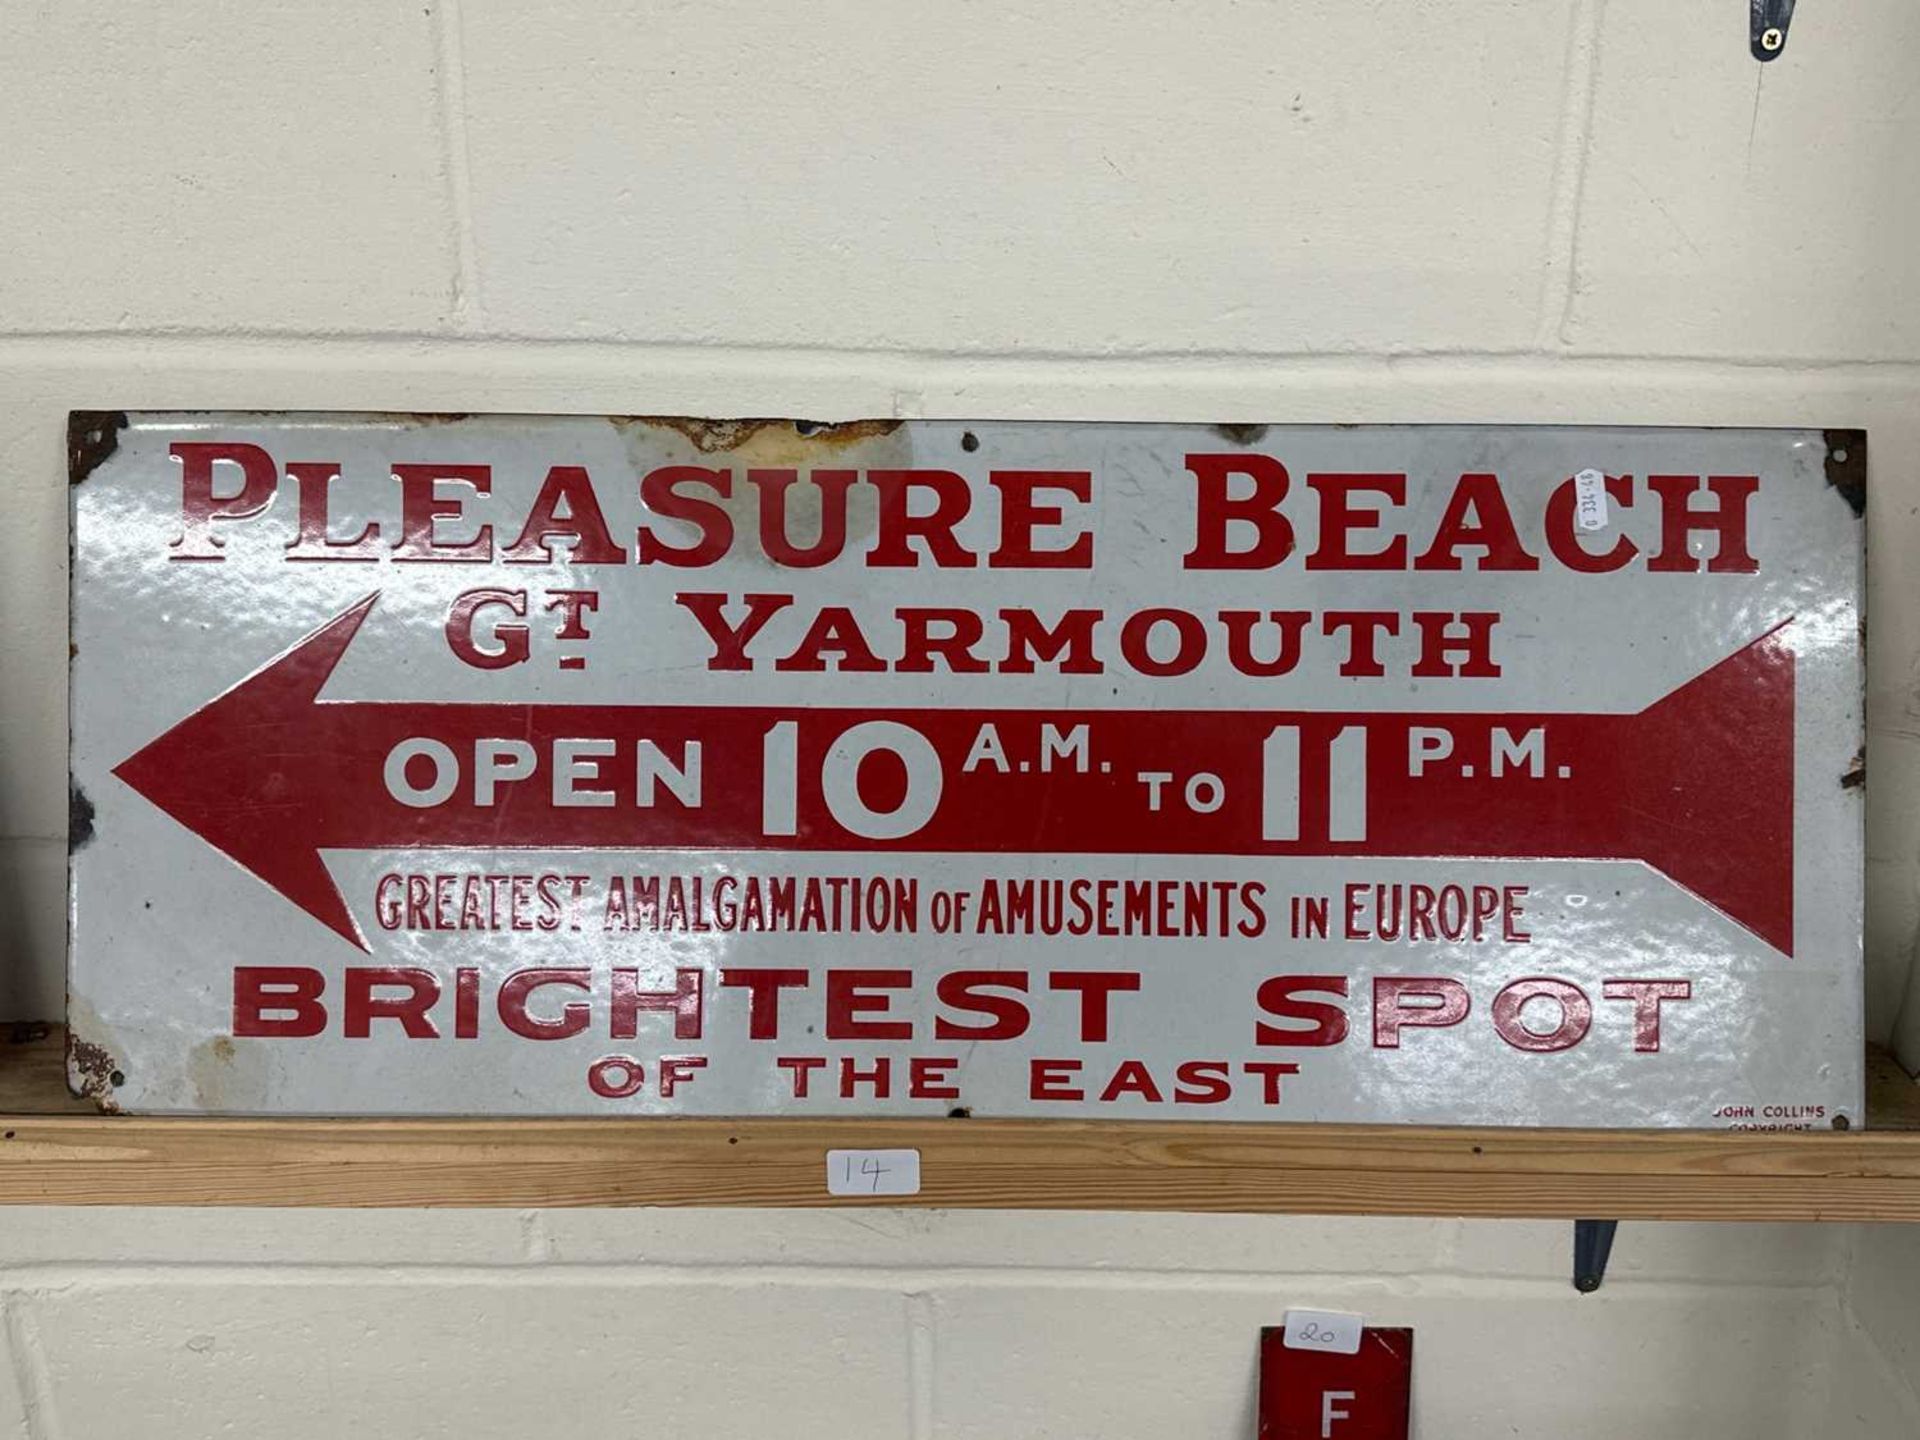 Directional metal sign for Pleasure Beach Great Yarmouth "Brightest Spot of the East"